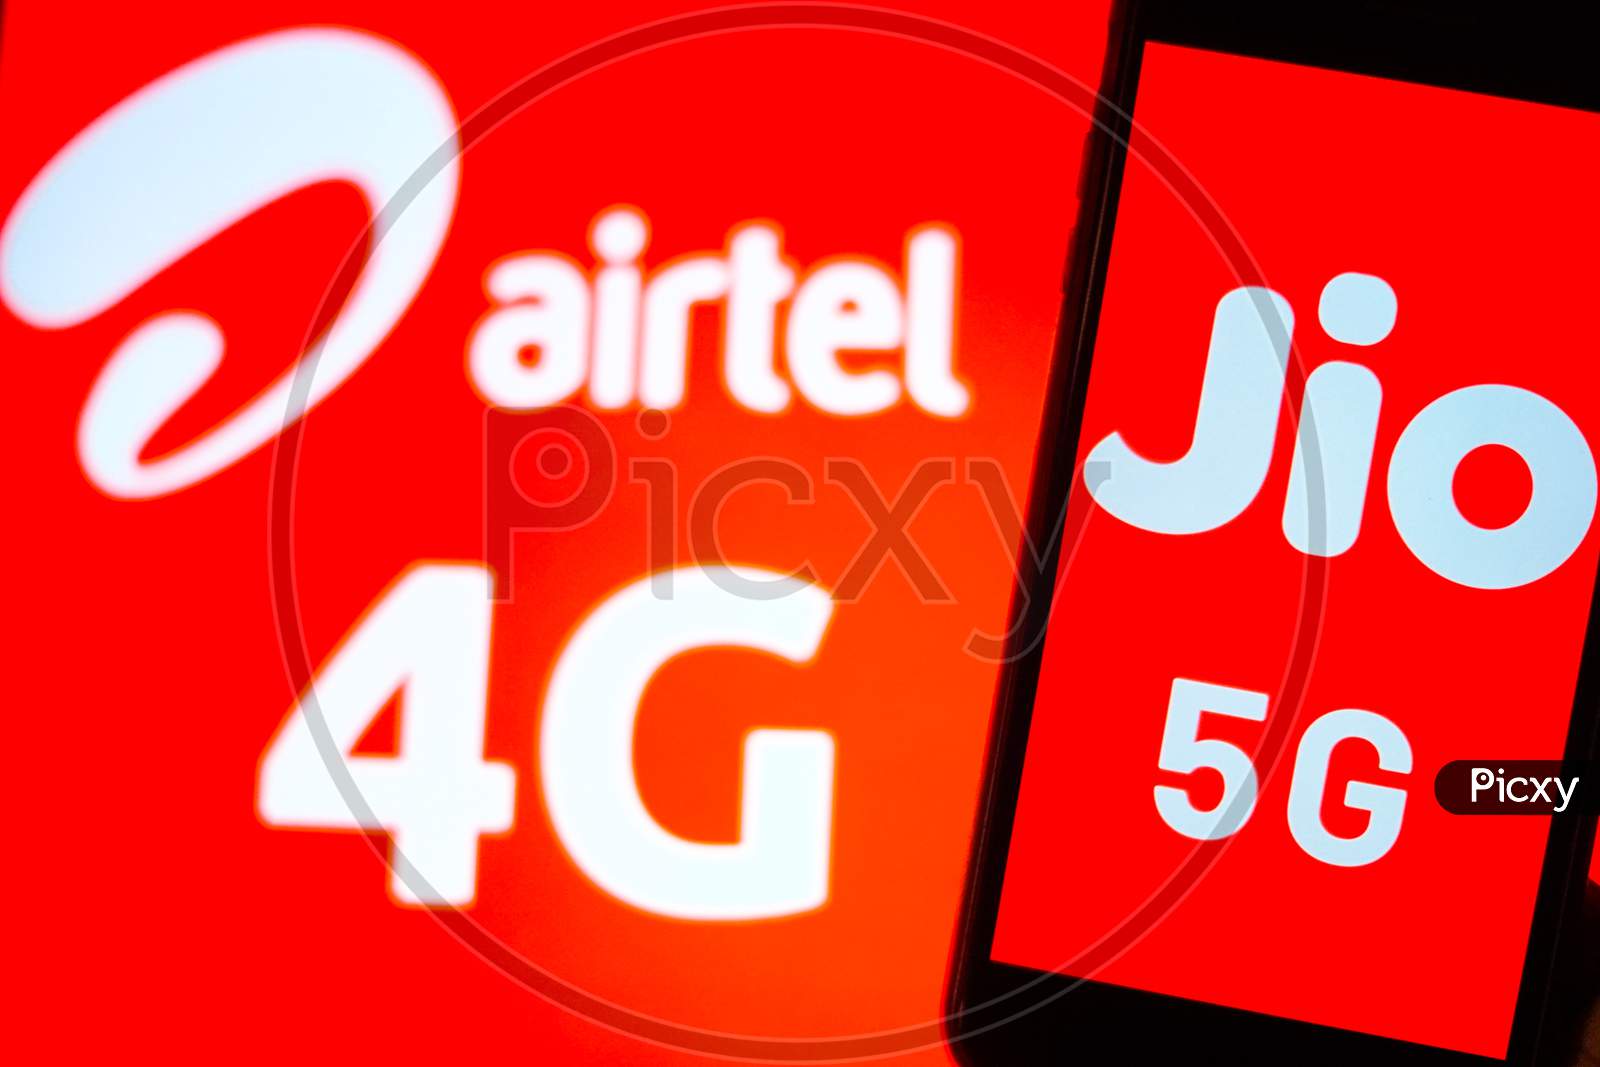 Close Up shot of a Mobilephone or Smartphone with Jio 5G on Screen and Airtel Logo in the Background - A Concept of Jio 5G vs Airtel 4G